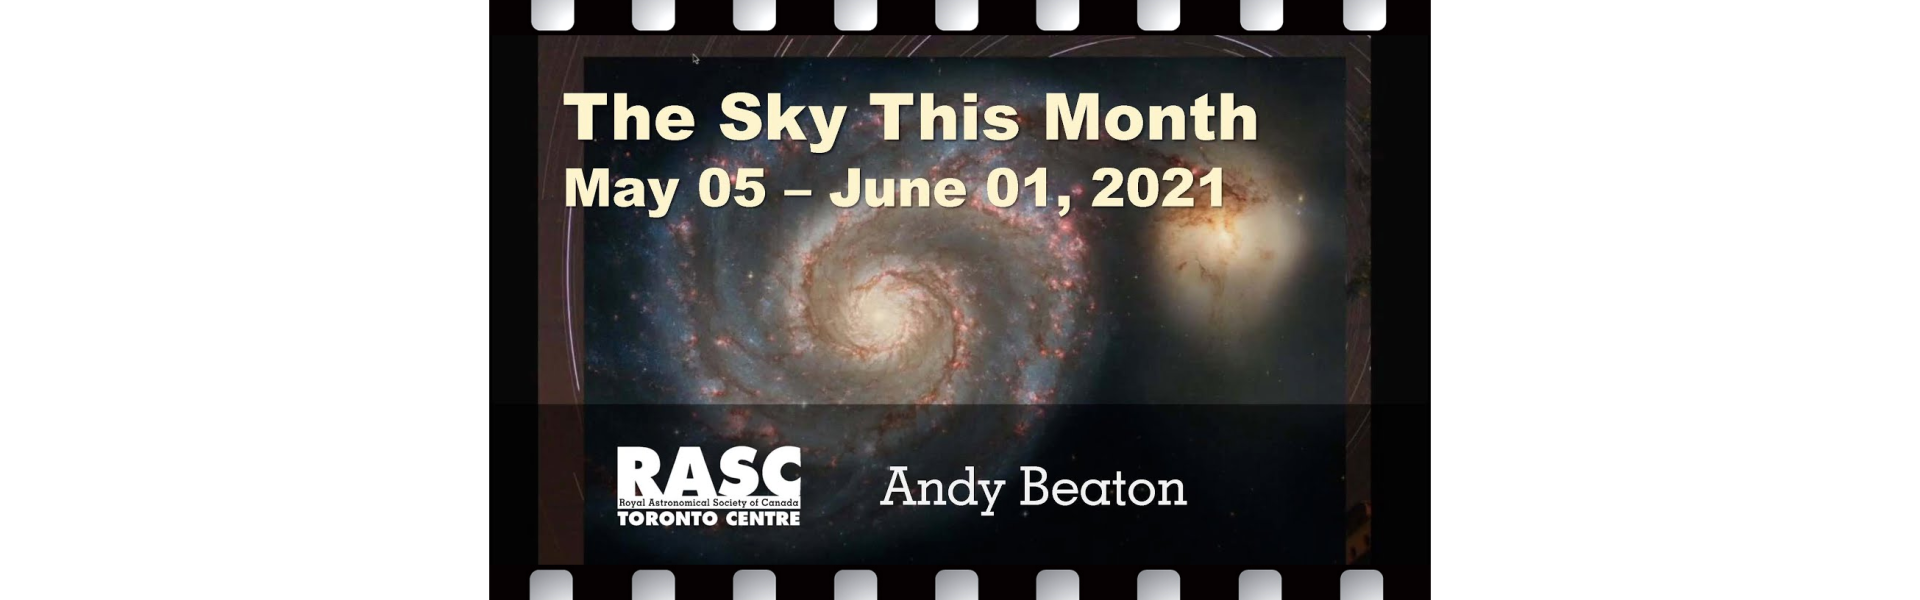 The Sky This Month May 05 - June 01, 2021